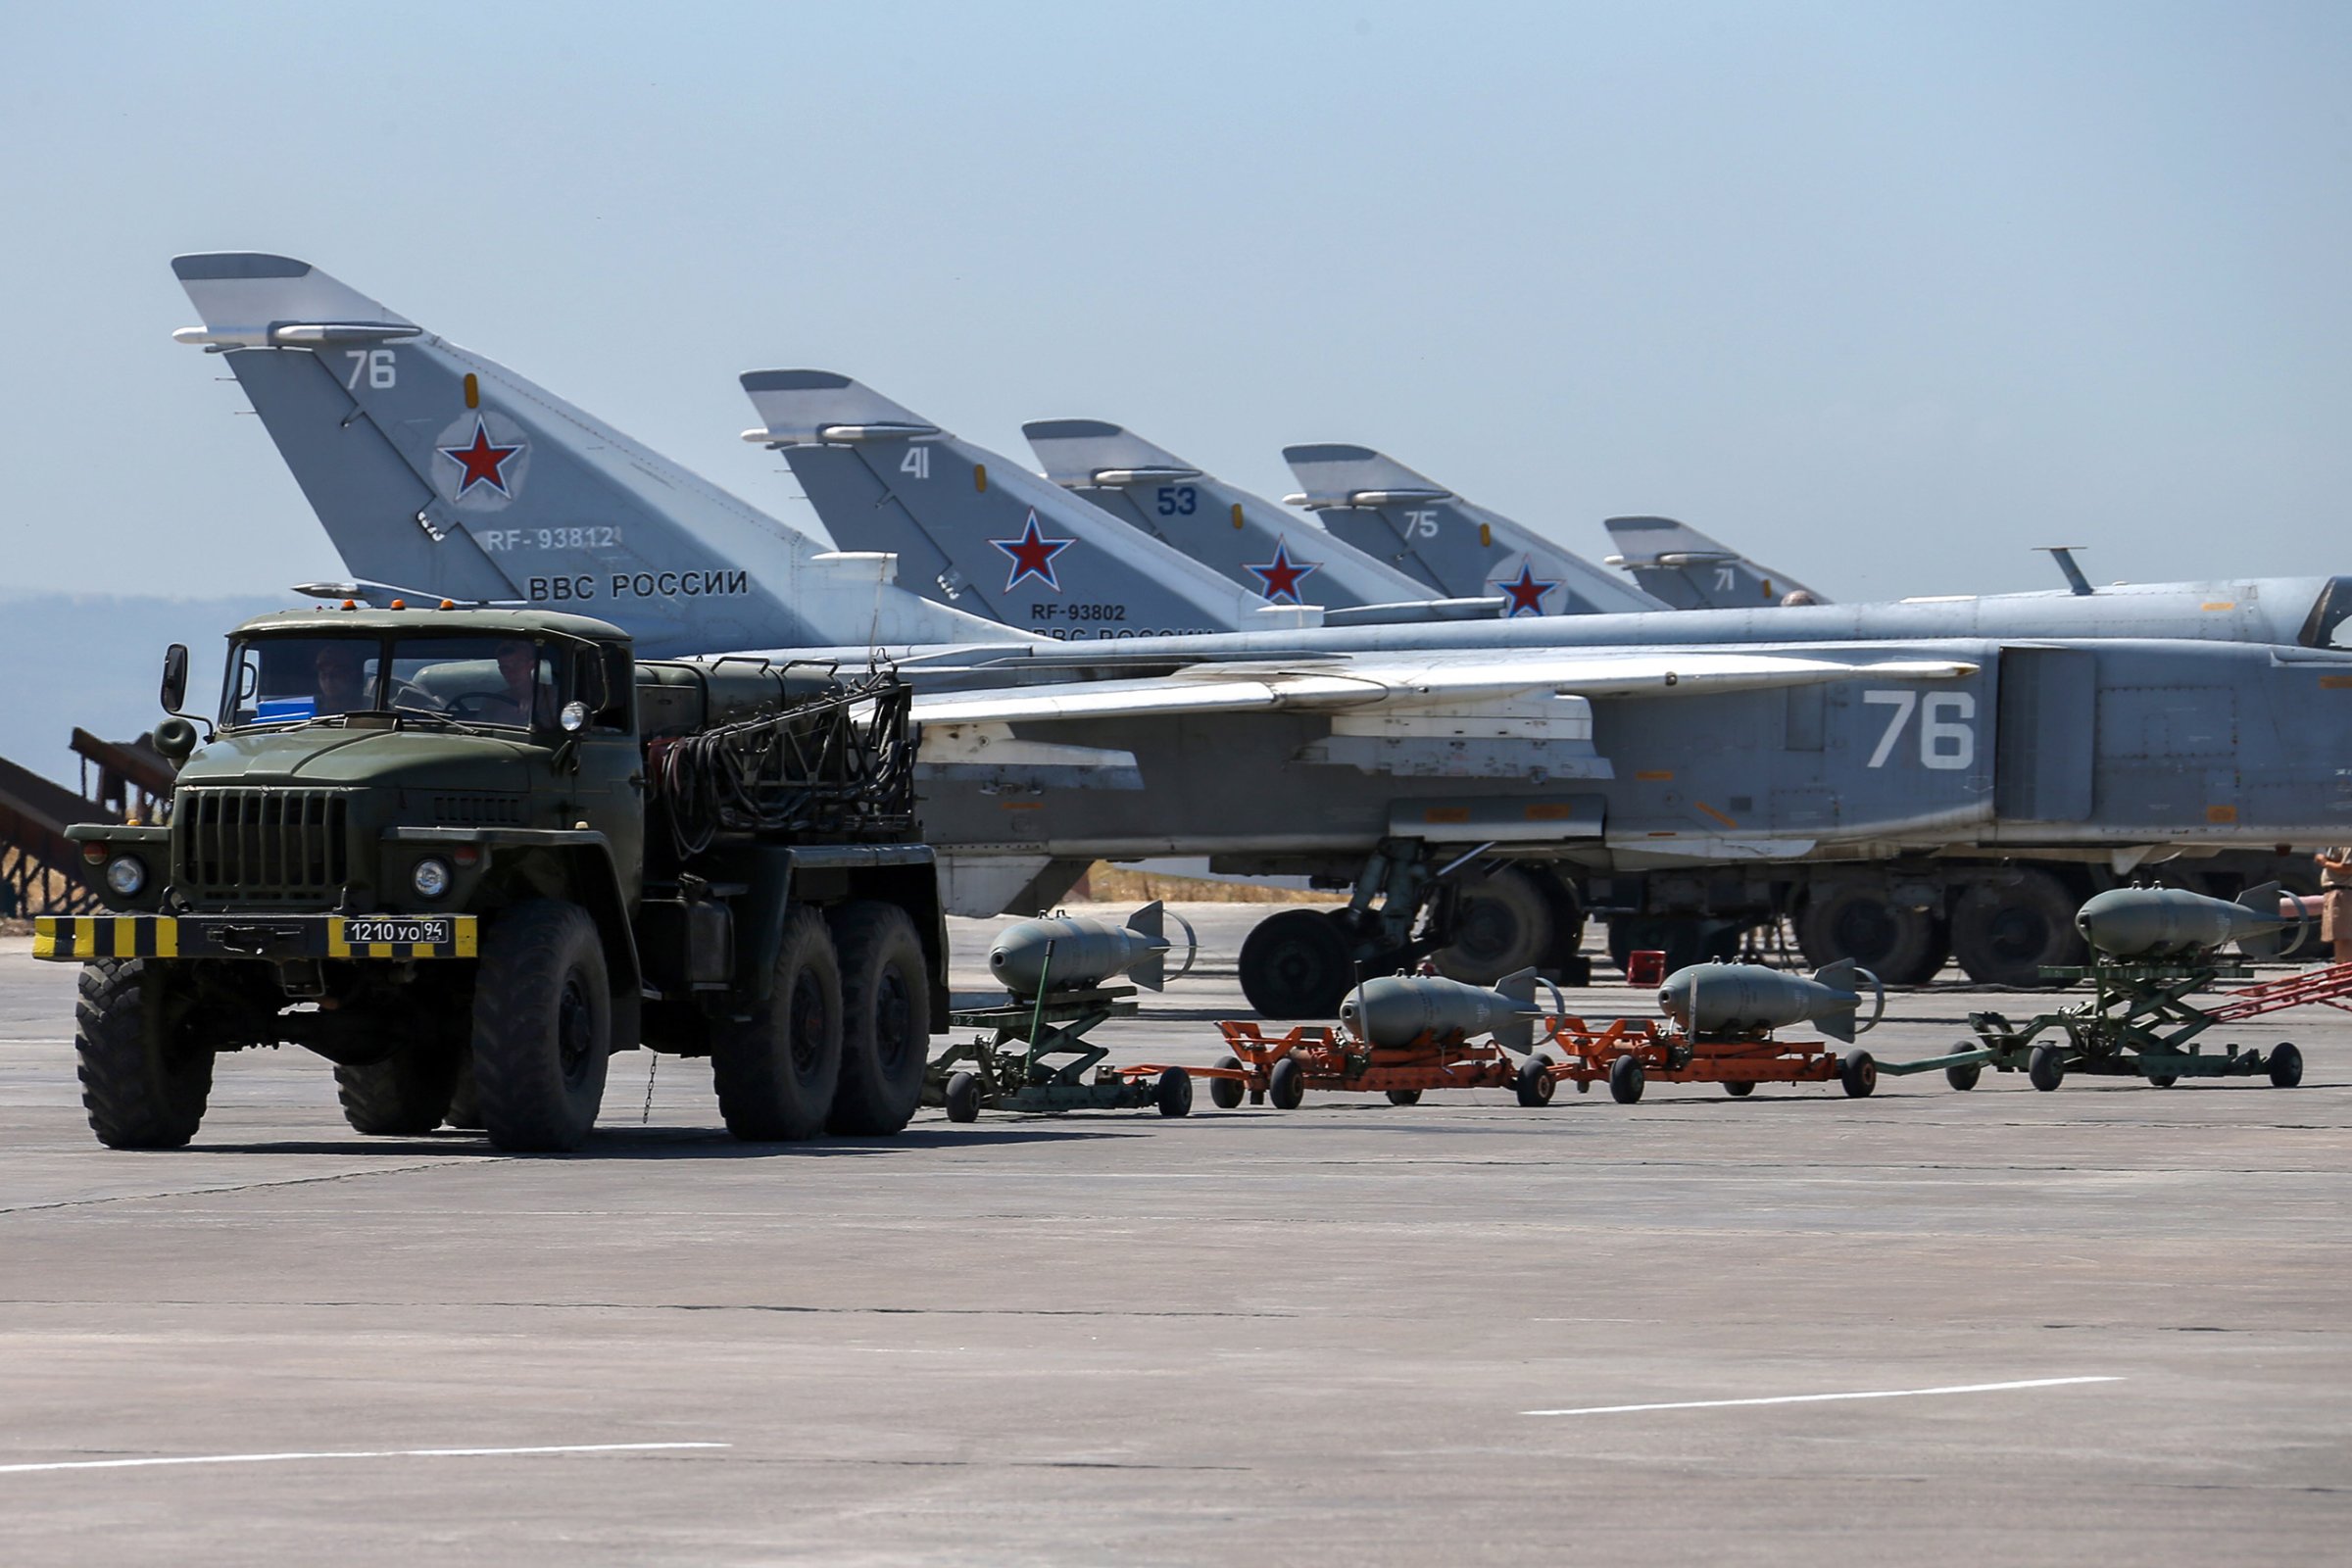 Russian fighter jets and bombers are parked at Hemeimeem air base in Syria on June 18, 2016.